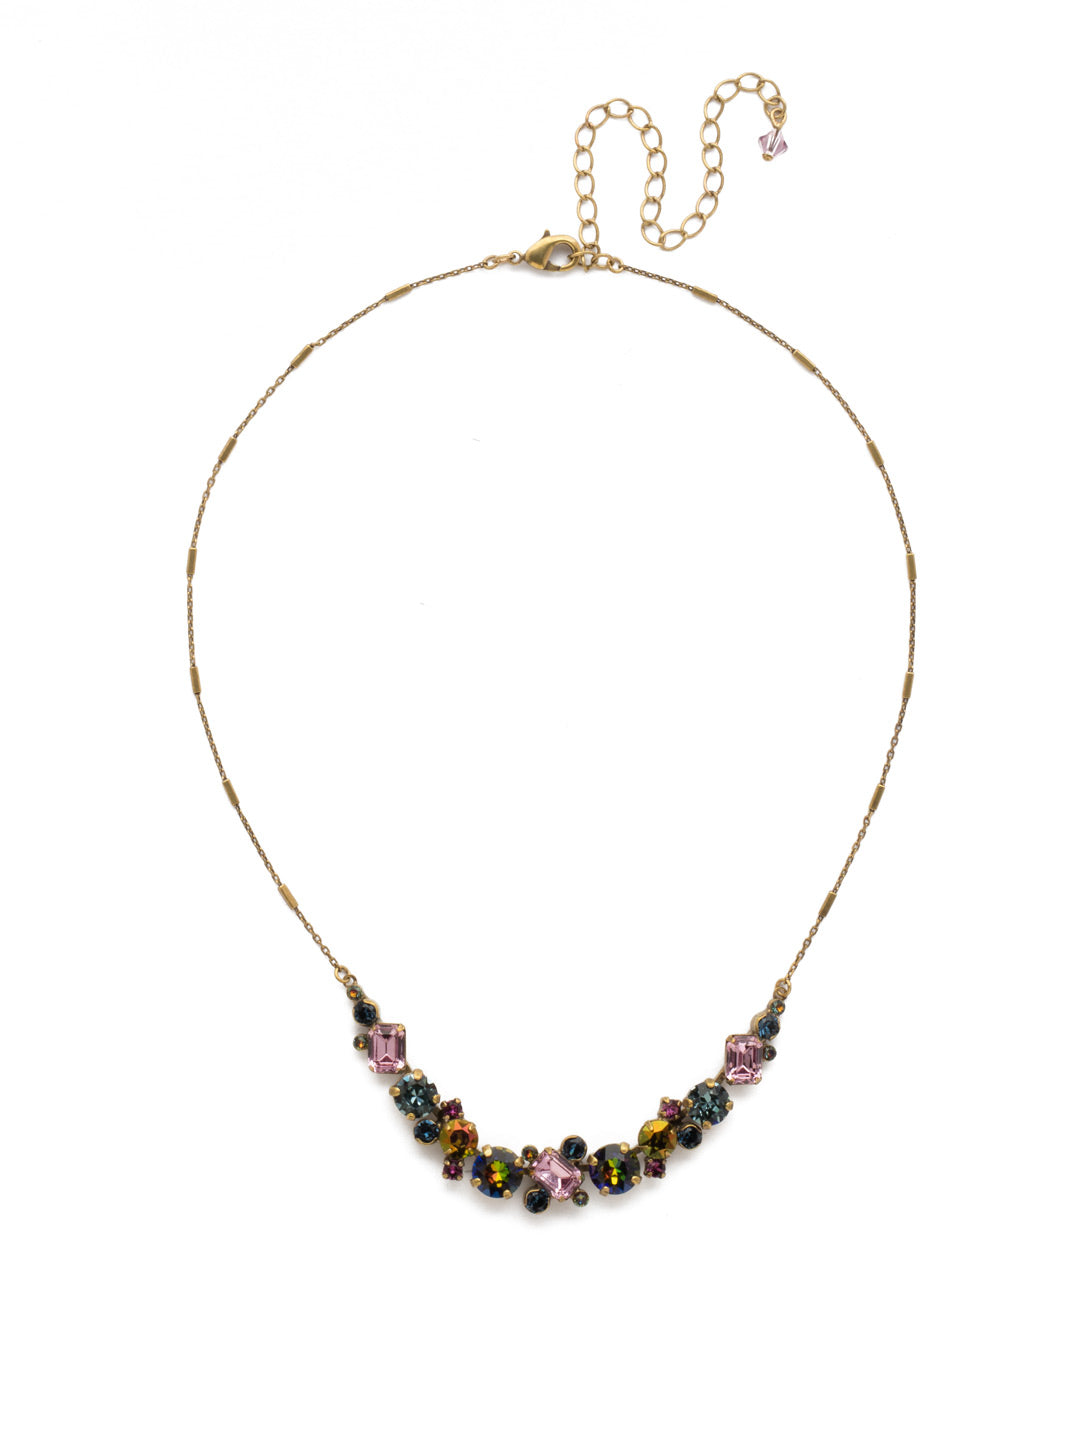 Datura Necklace - NDU64AGROP - A delicate half line necklace on a detailed chain that features a variety of crystal shapes.